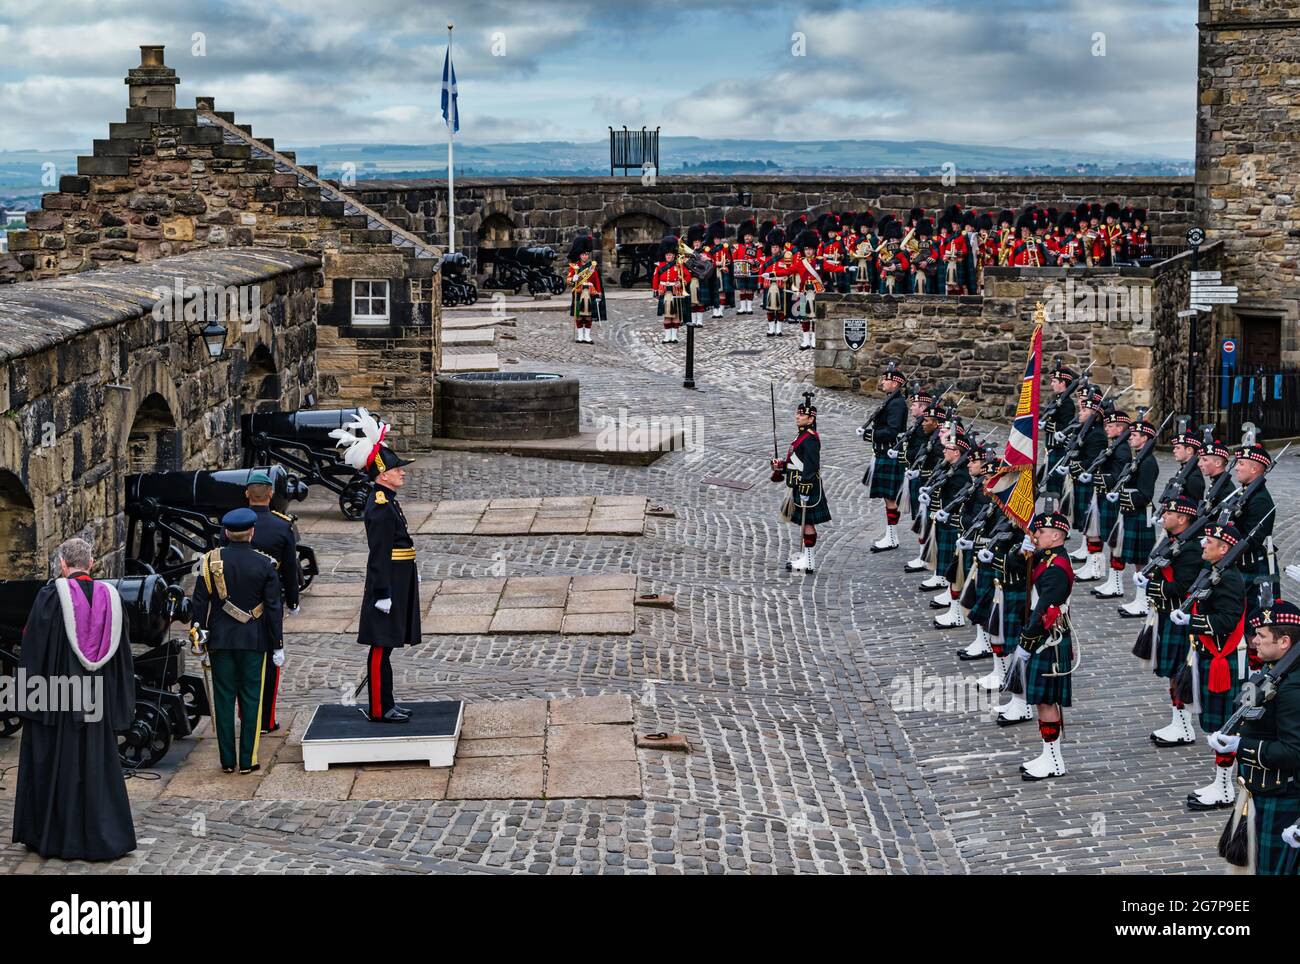 Inspection of troops at installation of Maj Gen Alastair Bruce of Crionaich as Governor of Edinburgh Castle in military ceremony, Edinburgh, Scotland, UK Stock Photo